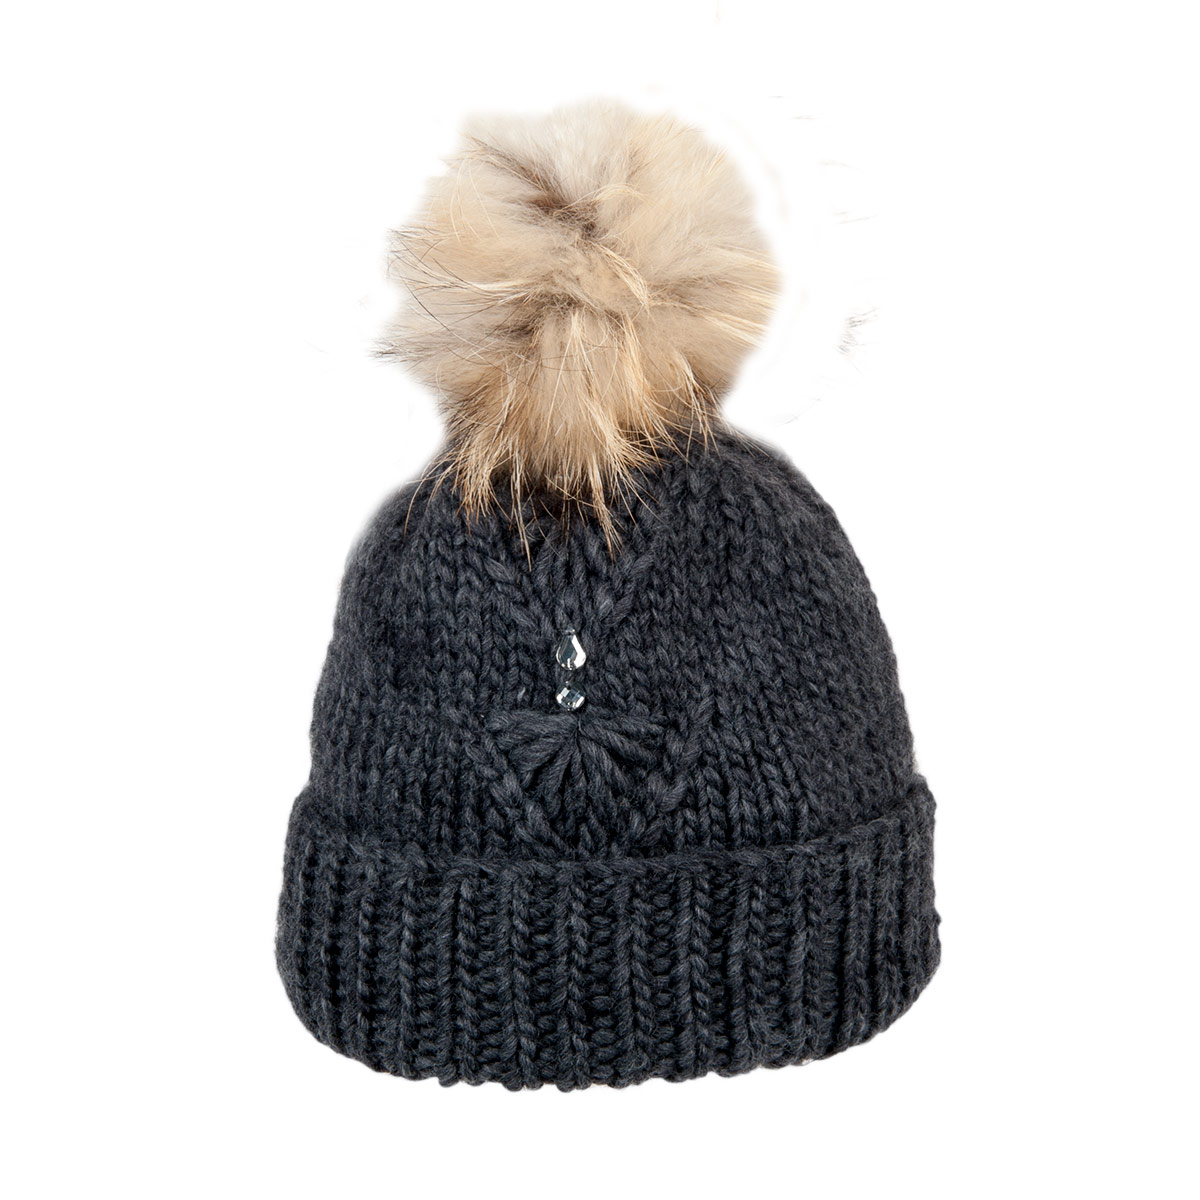 SEEBERGER knitted pompom hat with cuff and lining in fleece